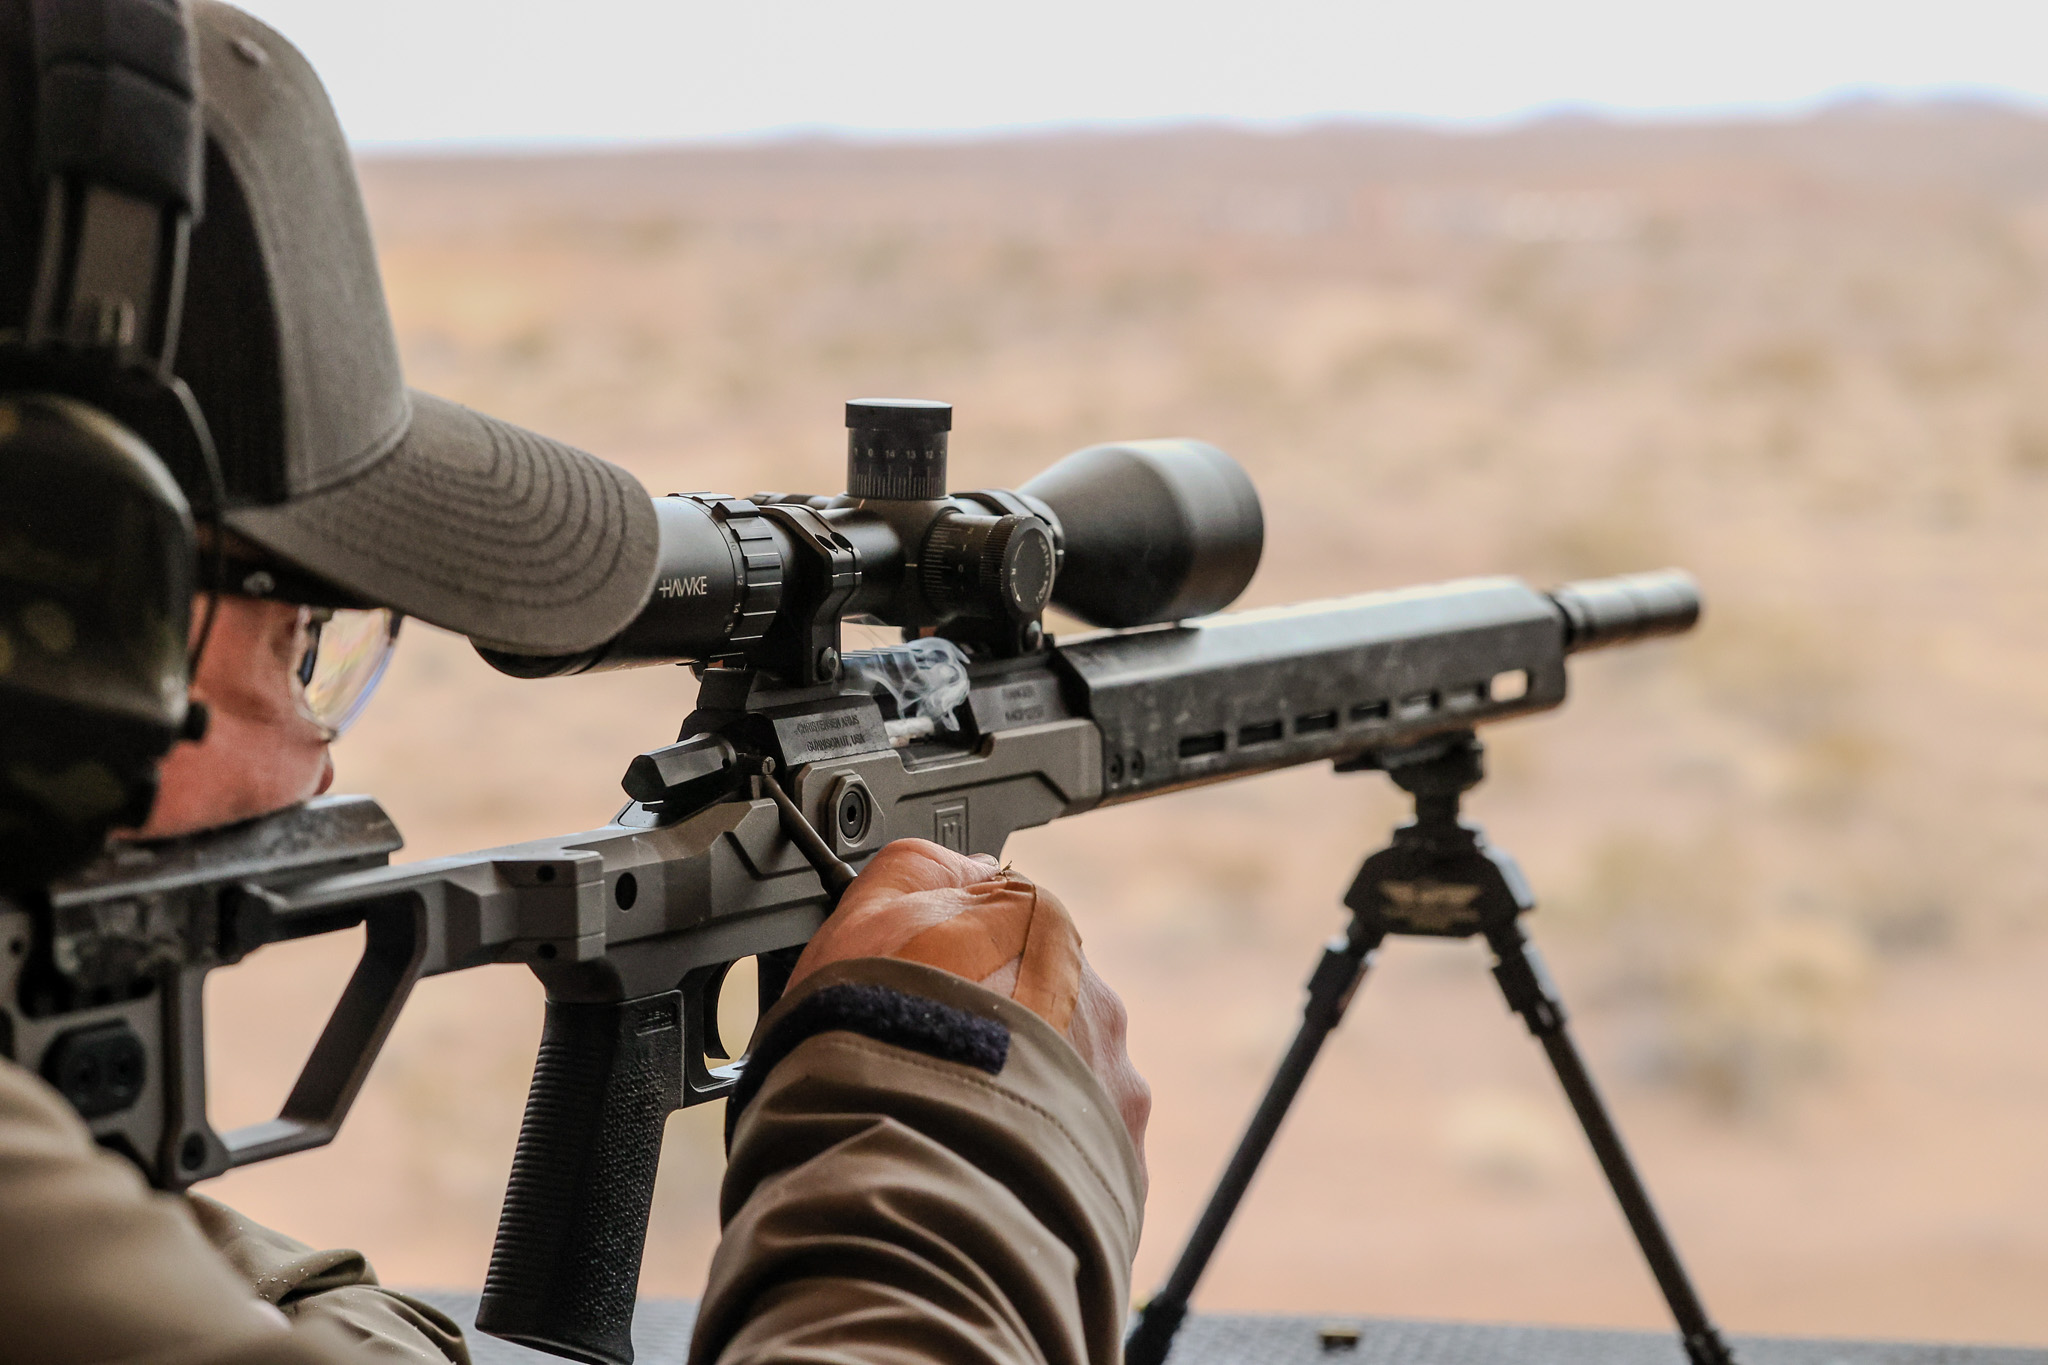 A shooter works the bolt on the action of a chassis-style bolt-action rifle on a bipod at a desert range.